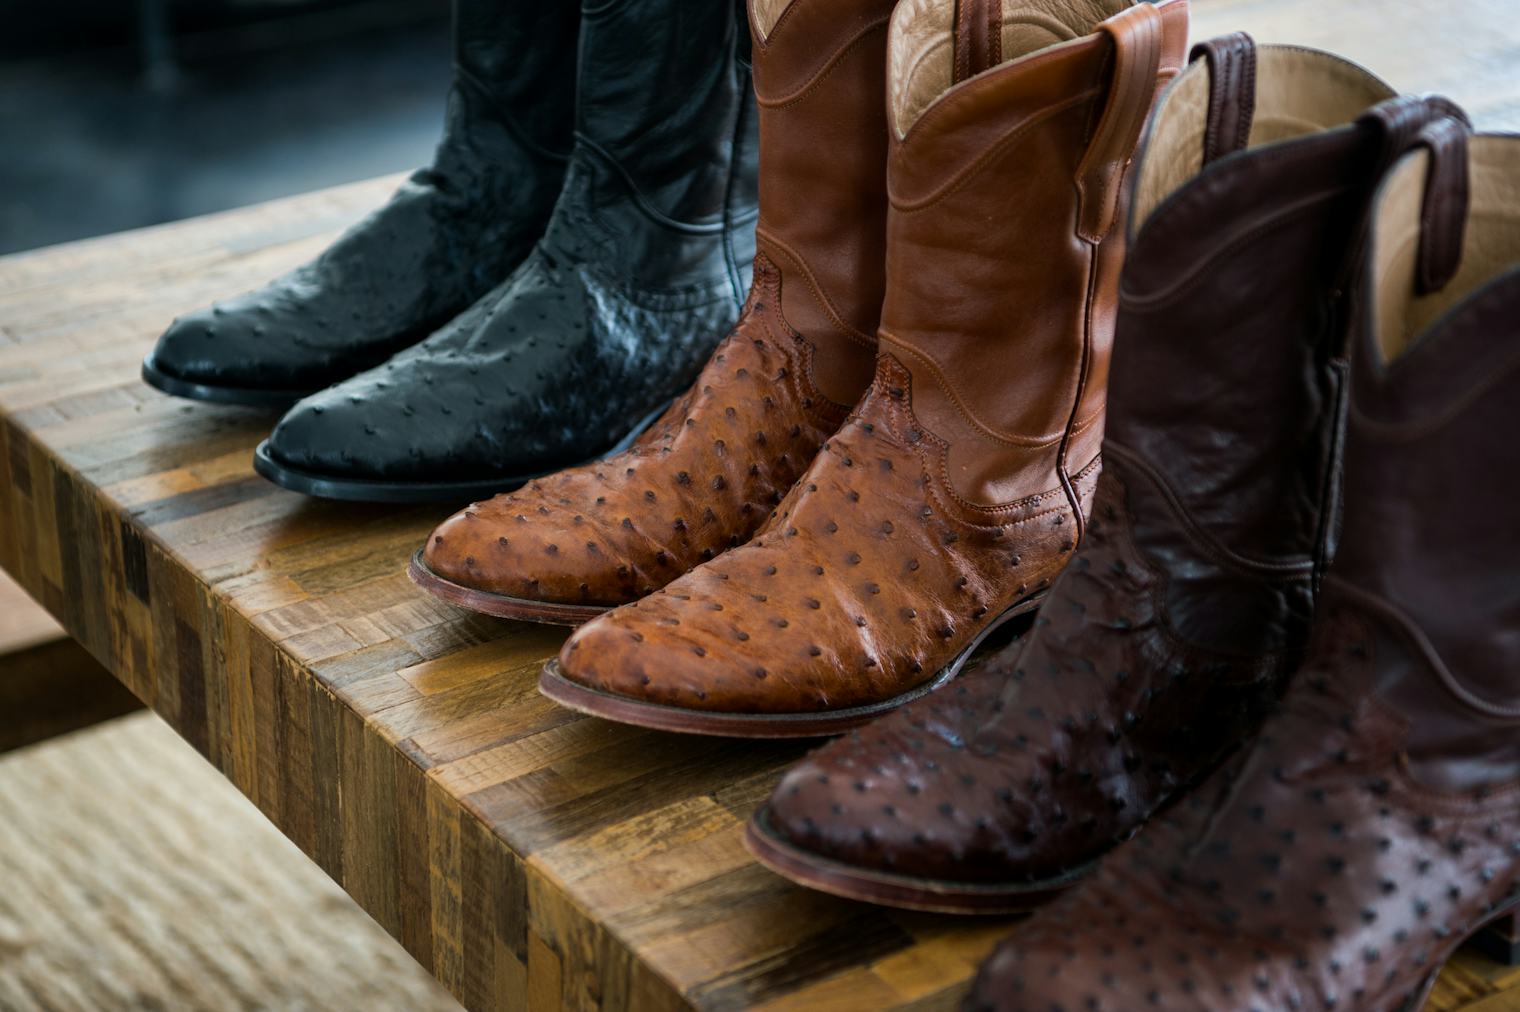 Made for gawking: Inside Tecovas' plan to build a cowboy boots empire